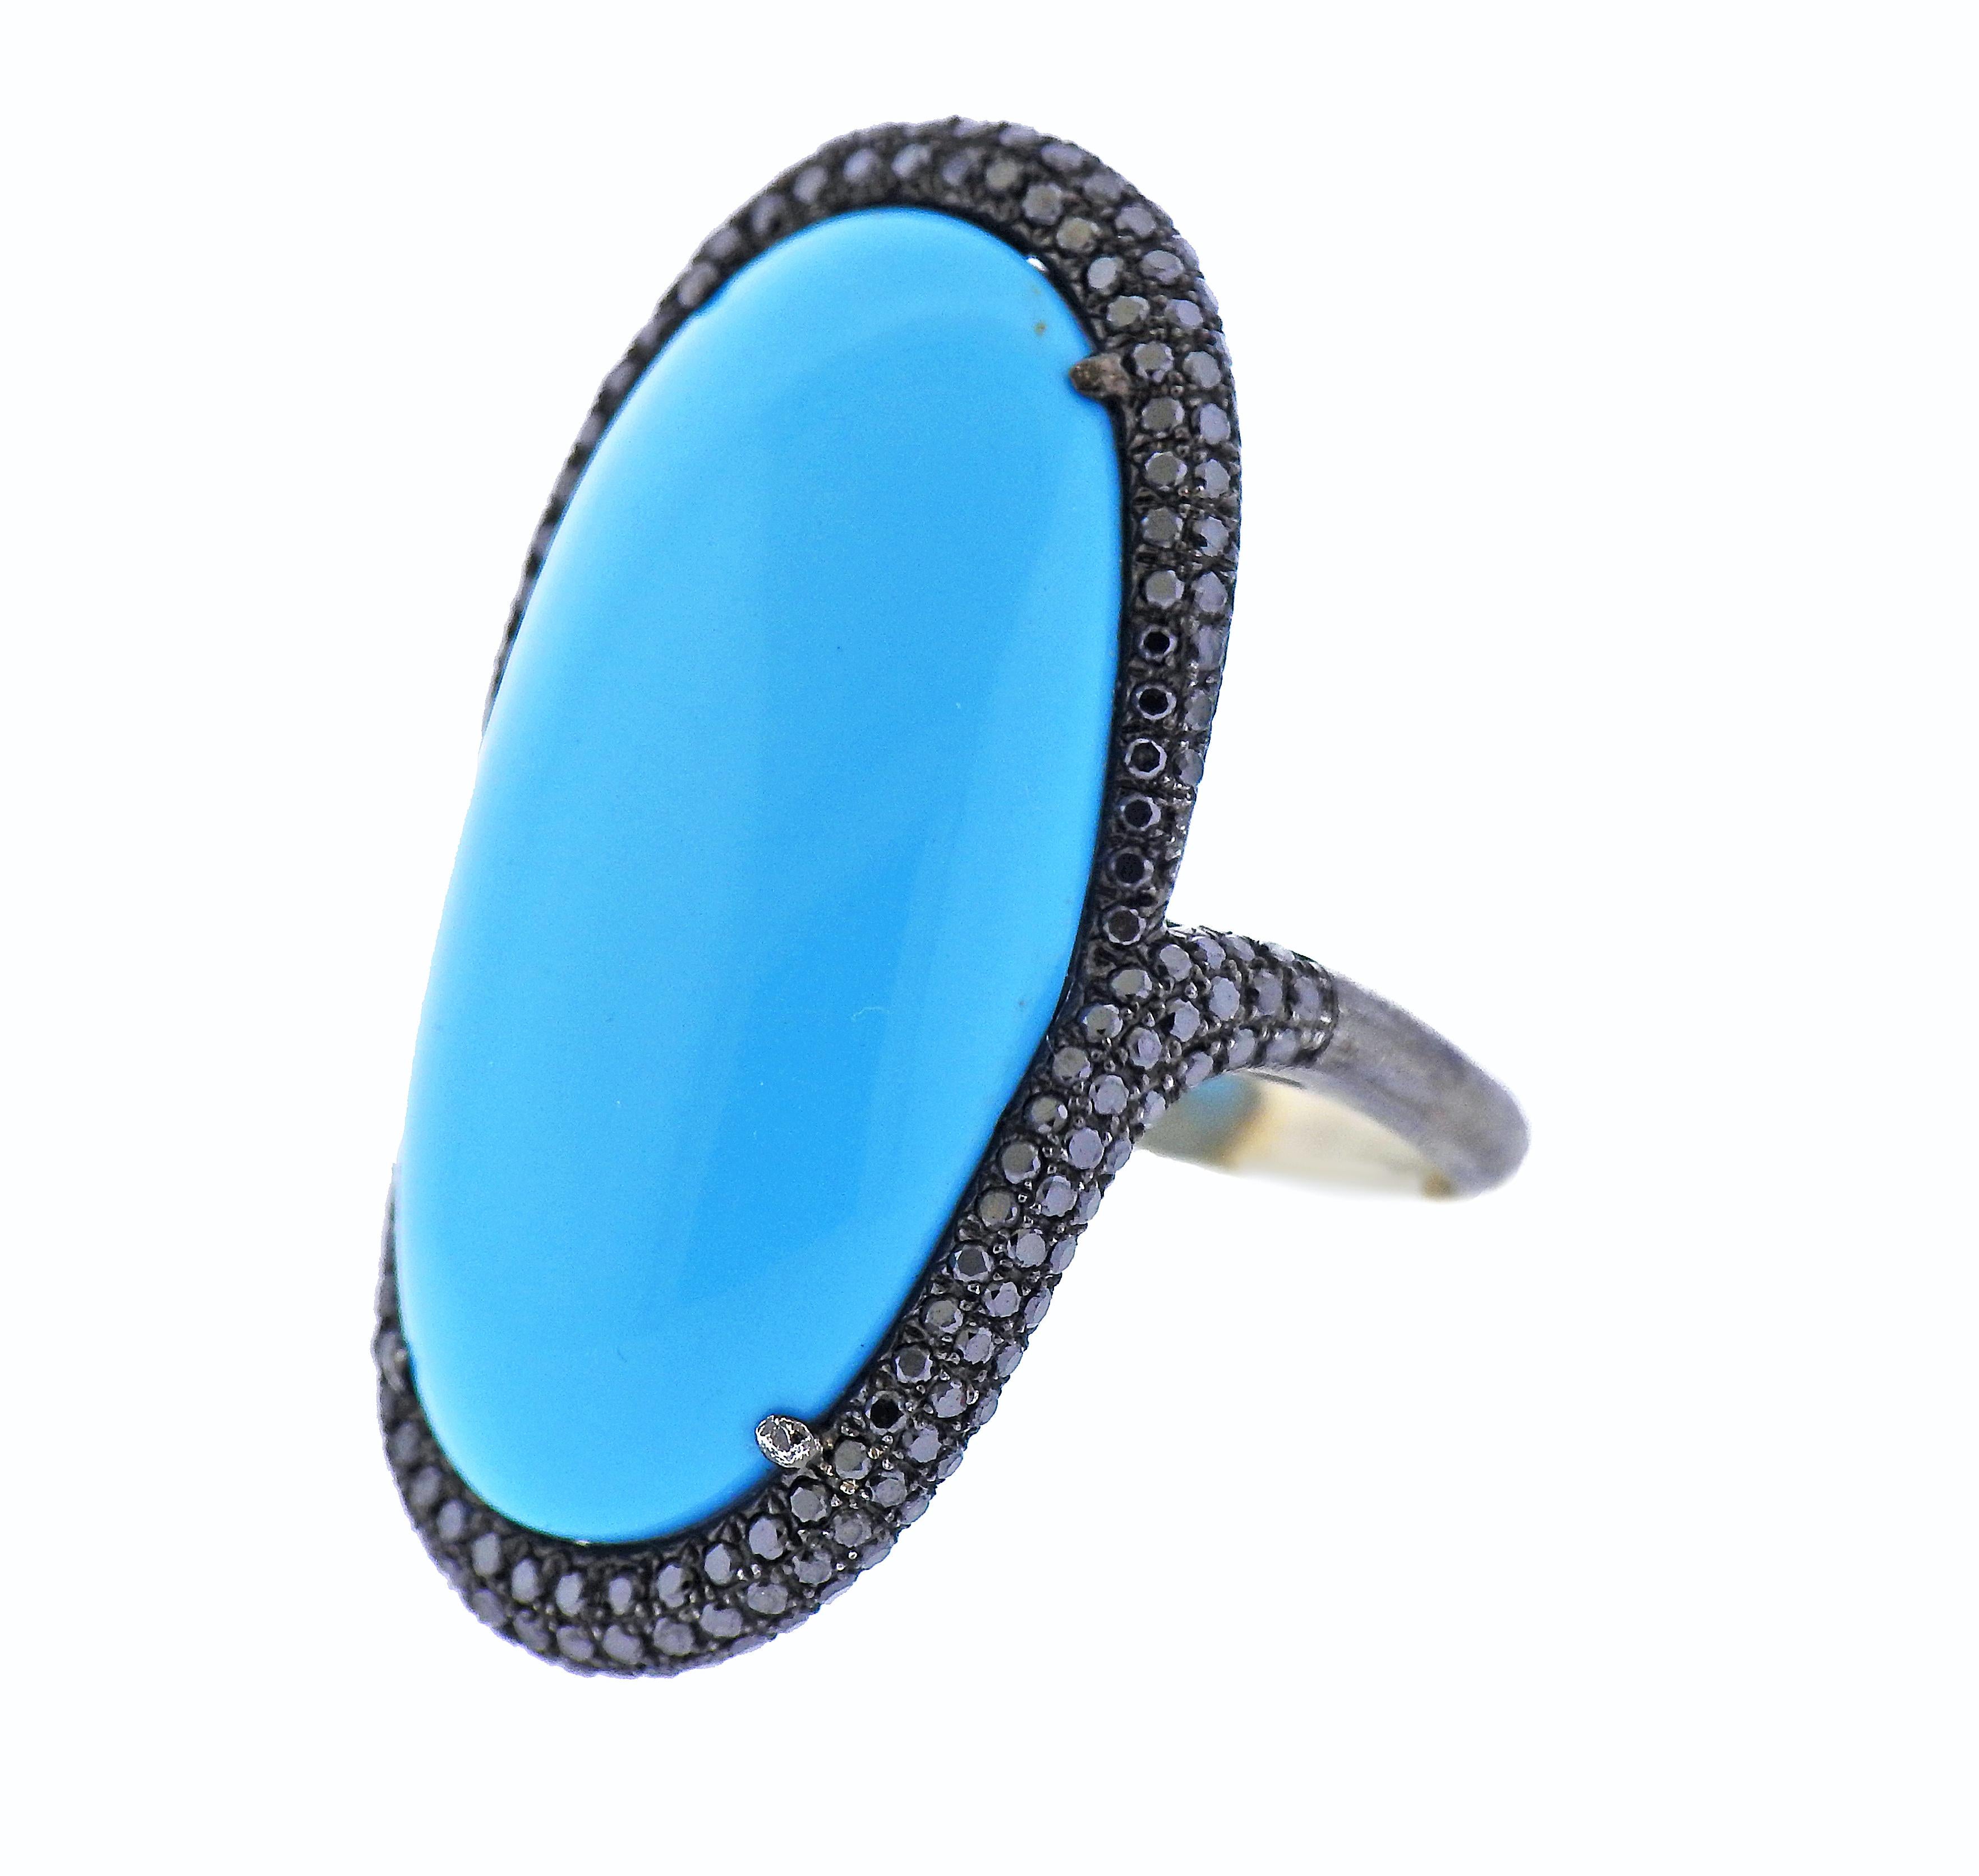 14k blackened white gold cocktail ring, set with a center blue stone (33mm x 18mm), surrounded with approx. 0.60ctw in black diamonds - one stone is missing. Ring size - 9.25, ring top - 38mm x 23mm. Tested 14k. Weight - 12.7 grams.